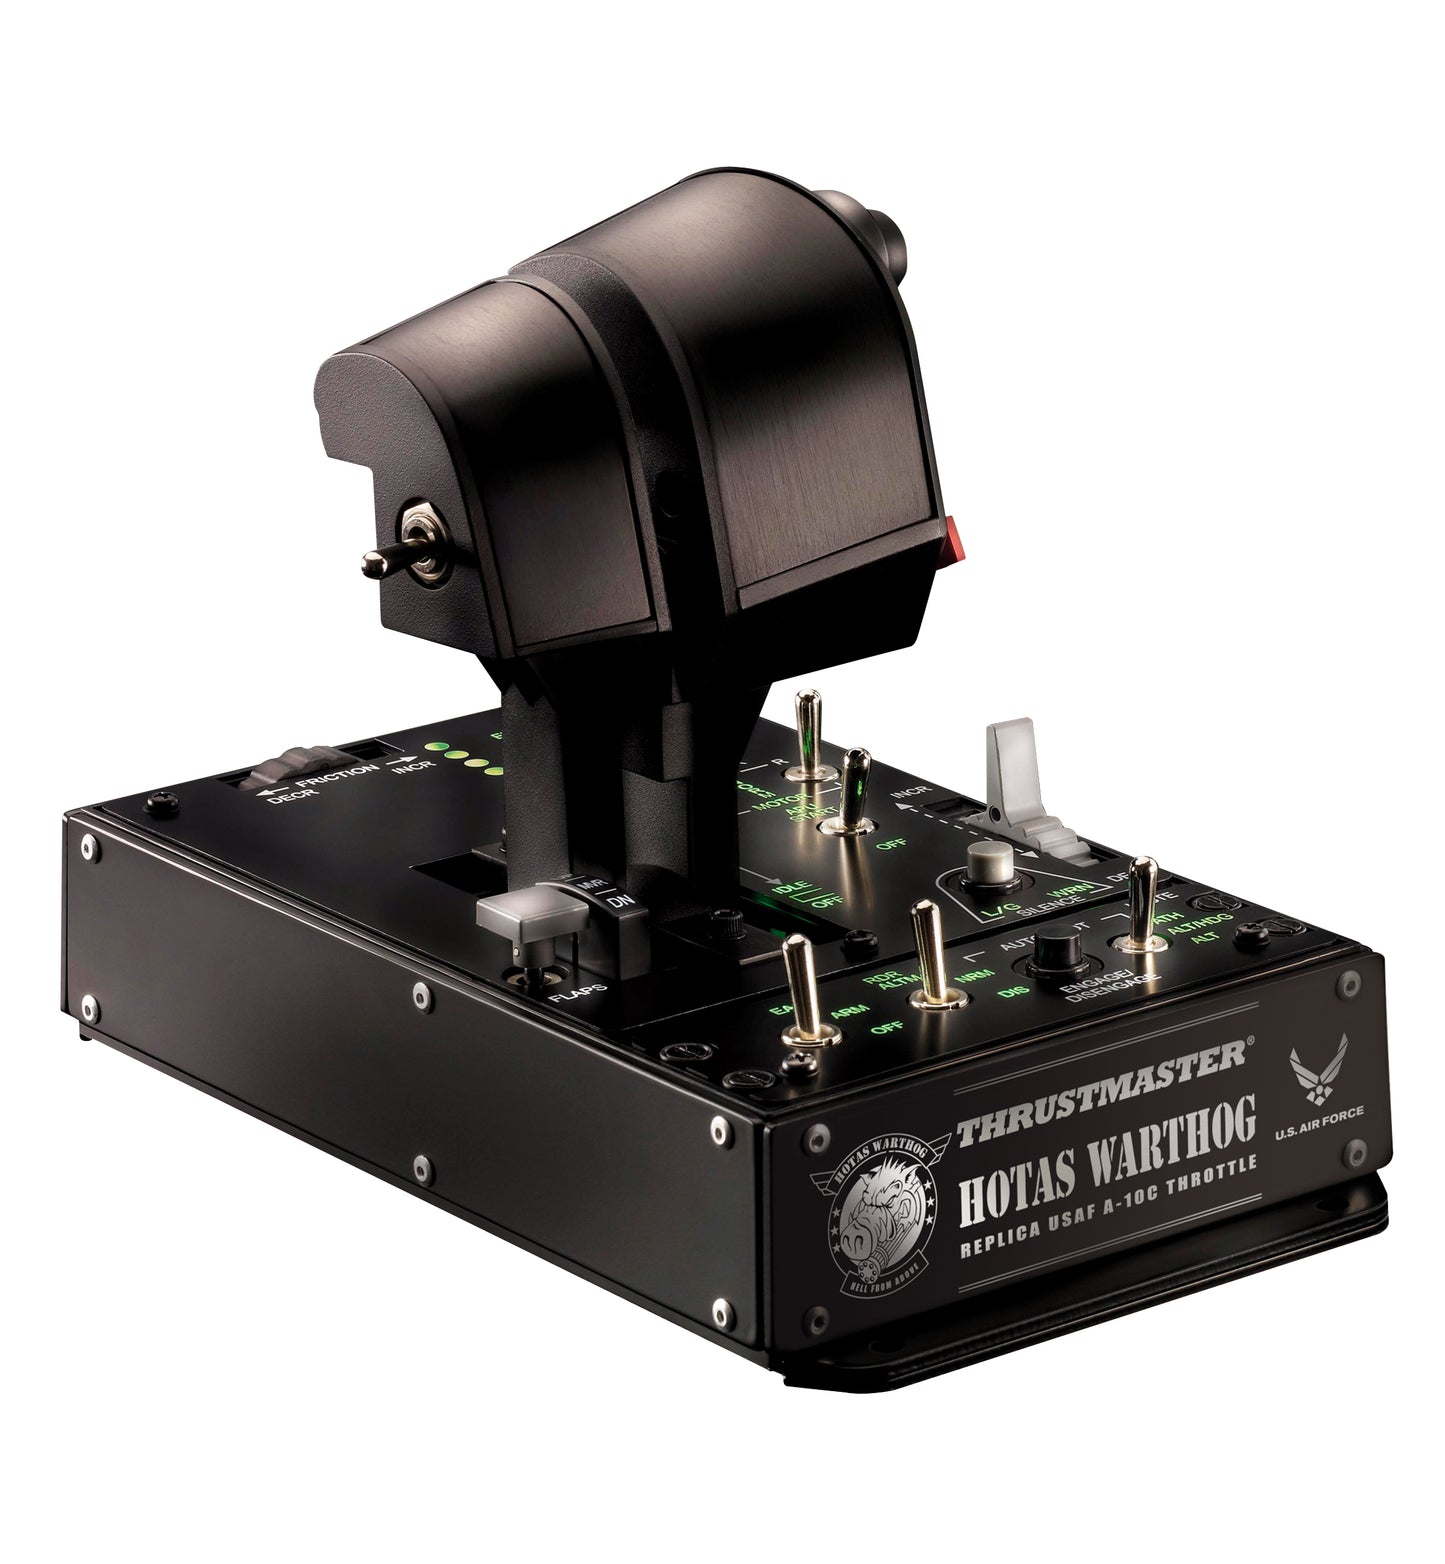 Thrustmaster HOTAS Warthog Flight Stick and Throttle for PC, VR